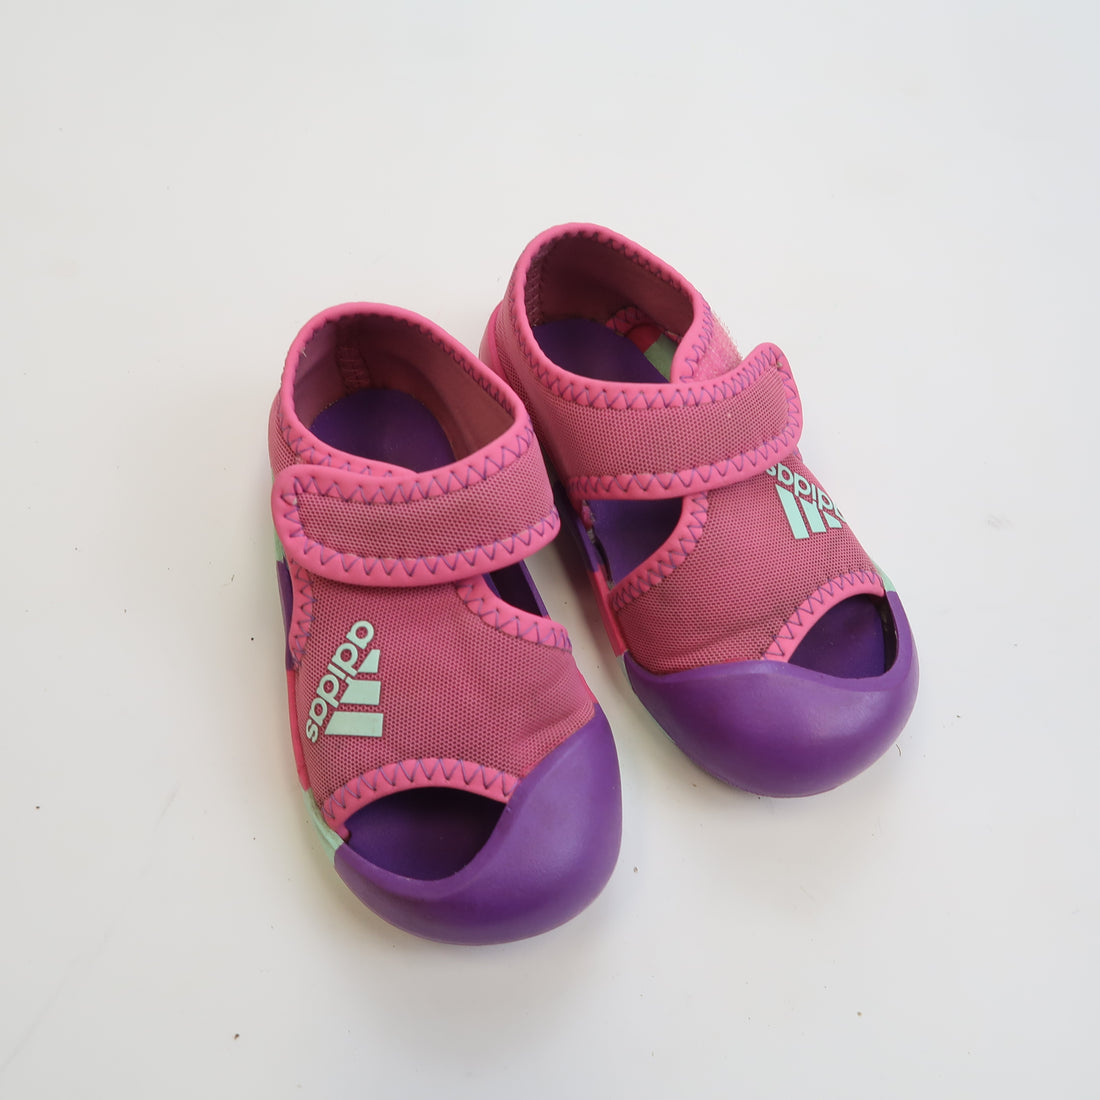 Adidas - Sandals (Shoes - 6)